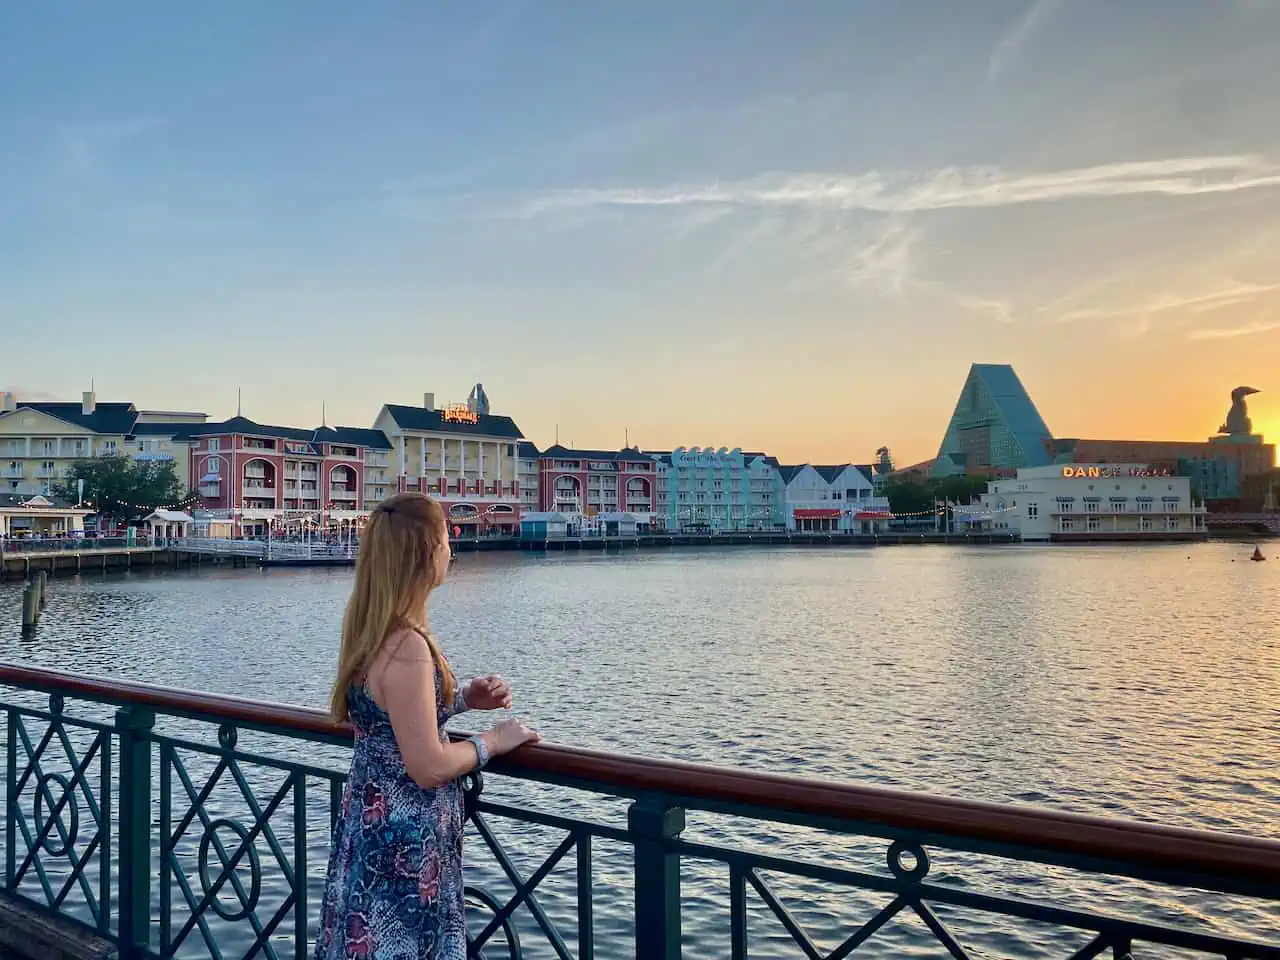 Erin at Disney Boardwalk with sunset int the distance